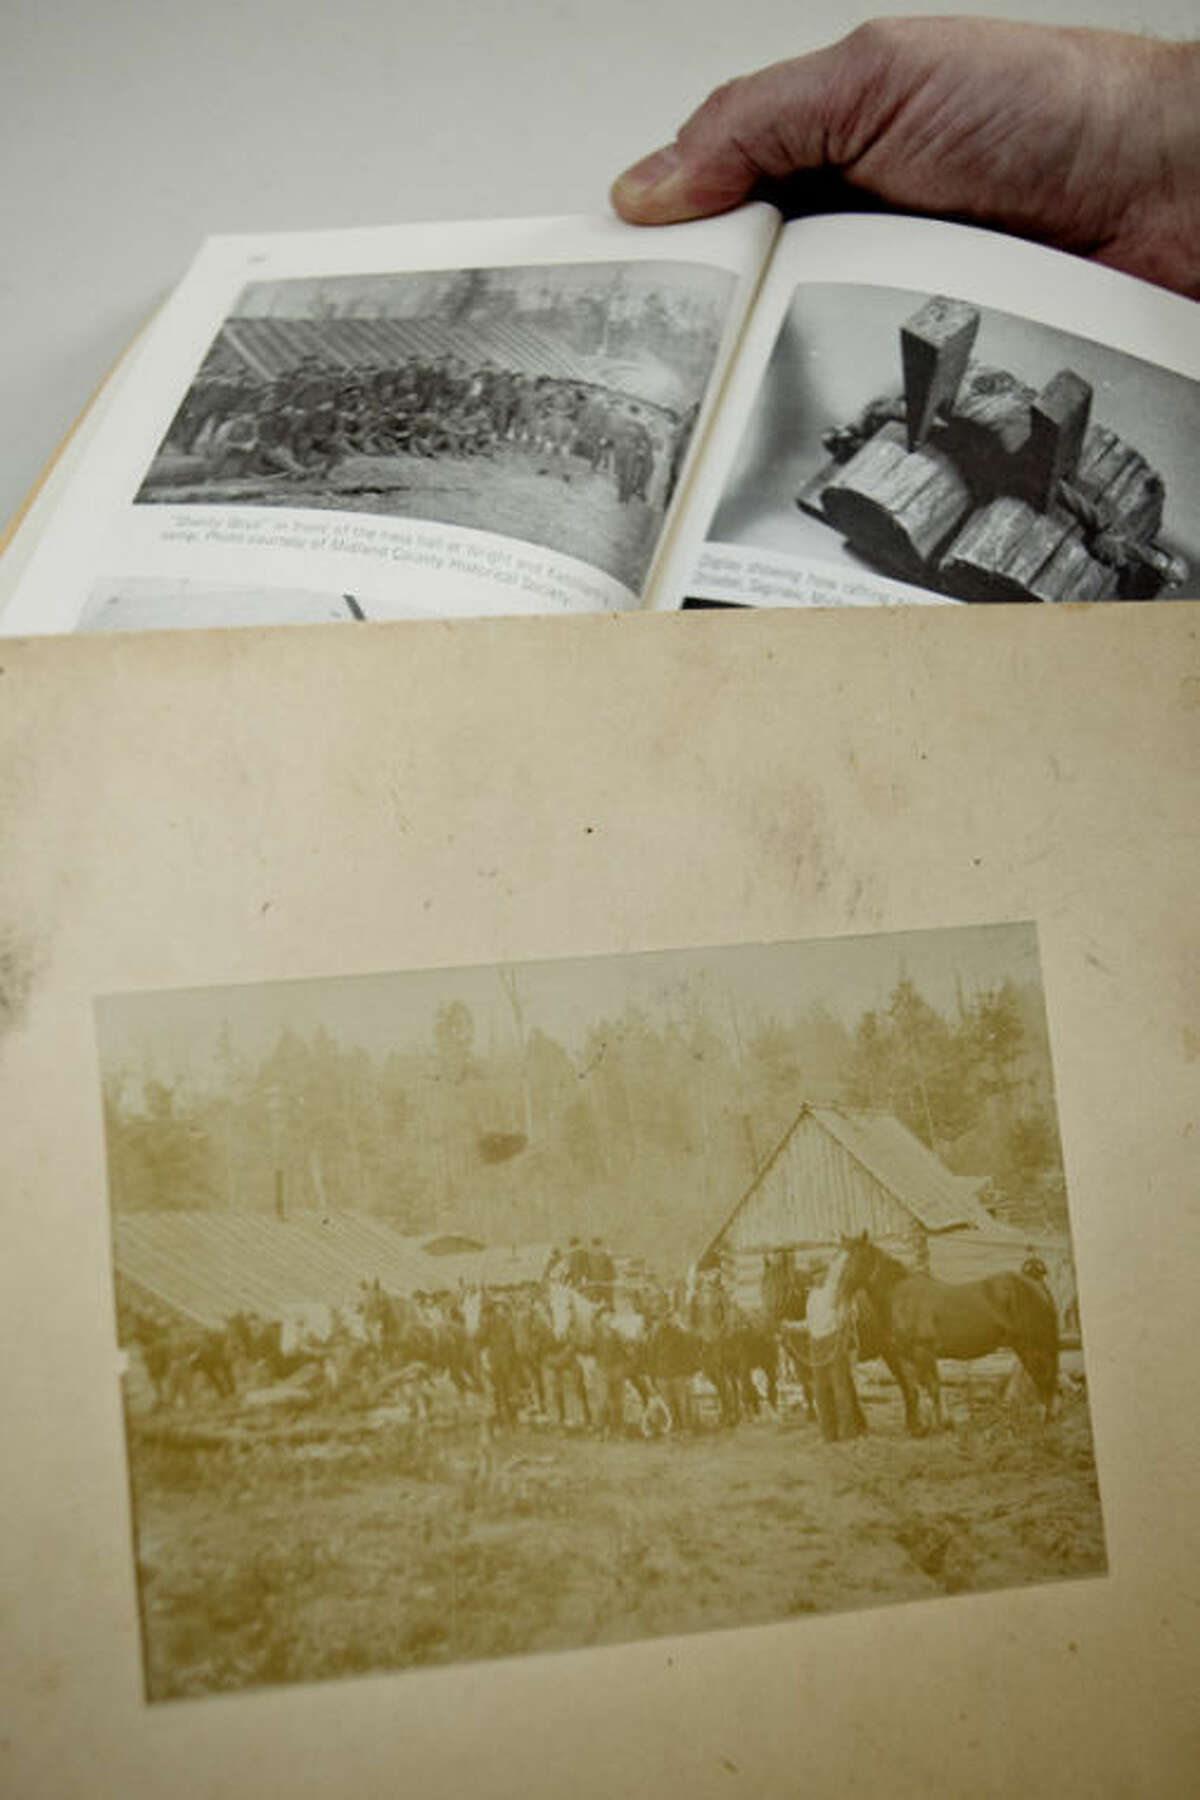 This photograph was donated to the Midland County Historical Society by the family of the late Francis Vinson of Midland. One of the historical society's volunteers matched the 130-year-old photograph with another one taken at the same time and published in a Midland County history book. They are photos of the Wright and Ketchum logging camp in the Averill/Sanford area.